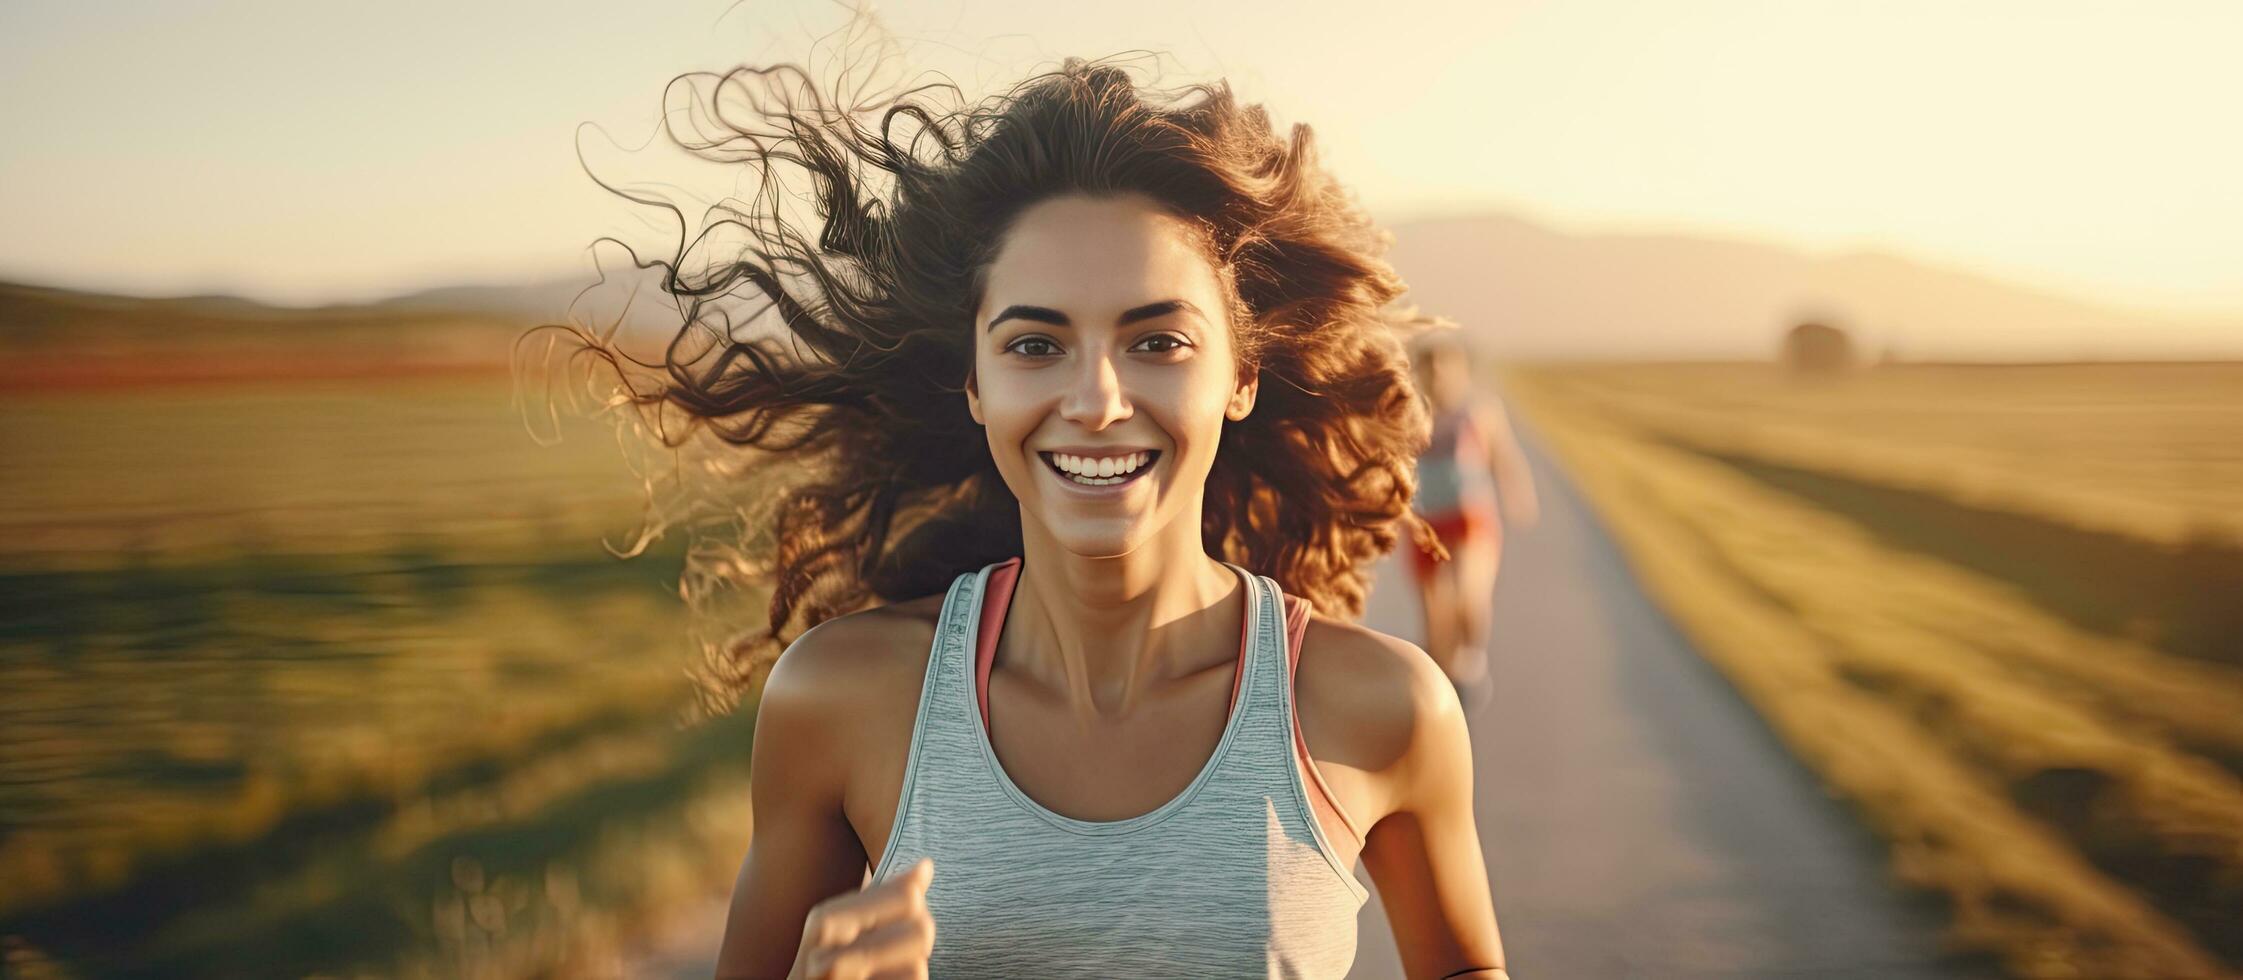 Young woman smiling and jogging along a country road radiating vitality in an active lifestyle photo